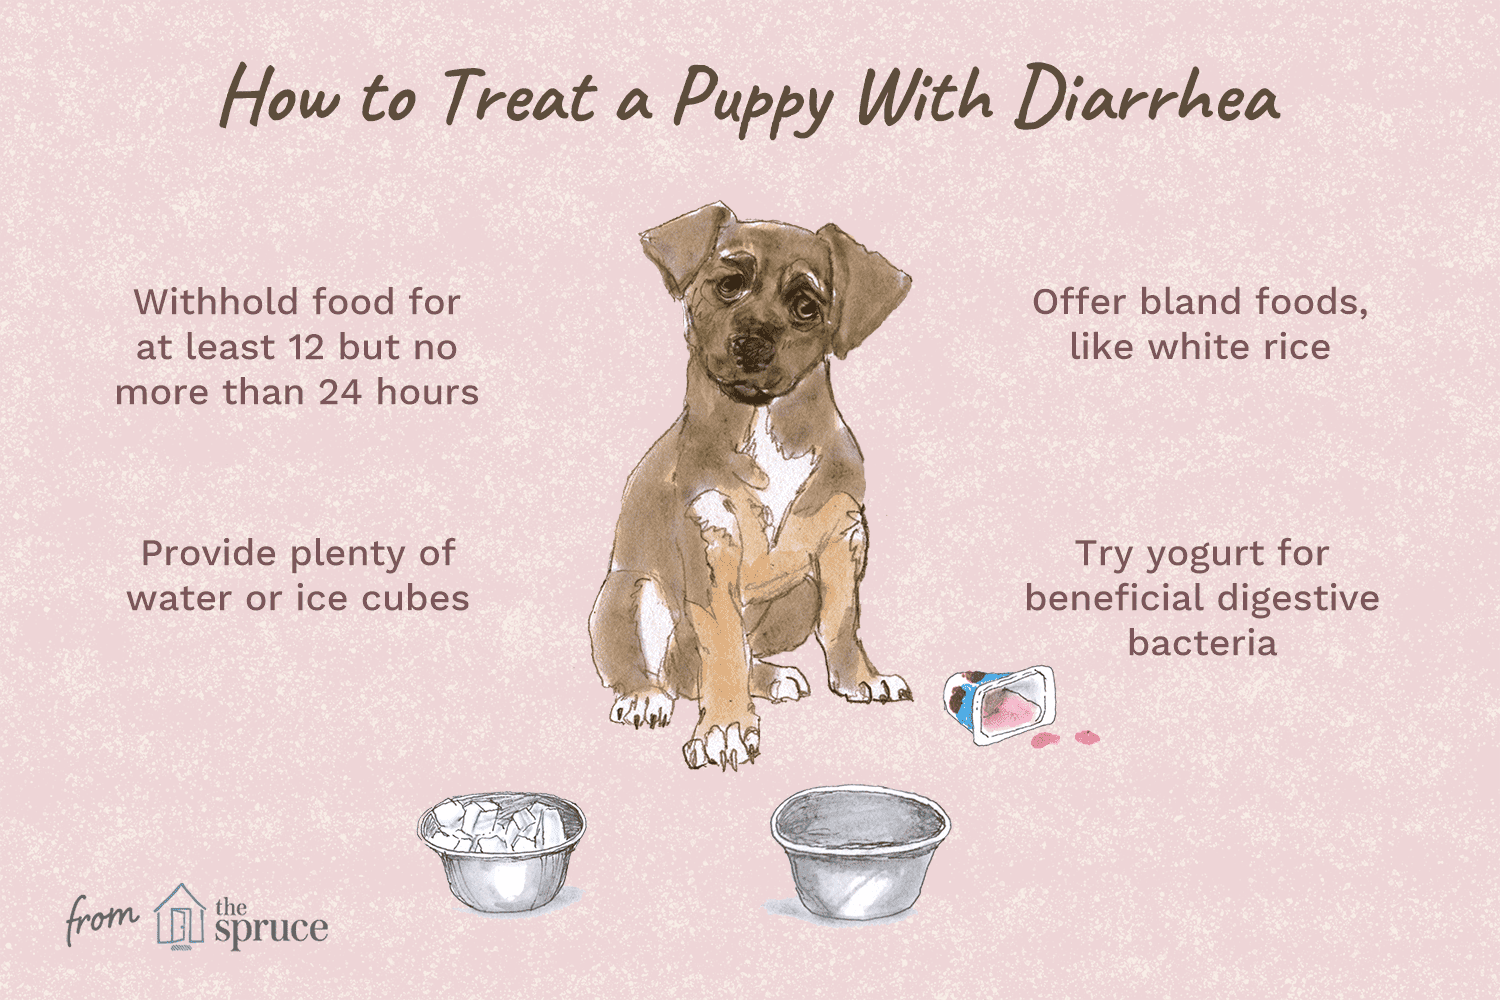 What to Do if Your Puppy Has Diarrhea